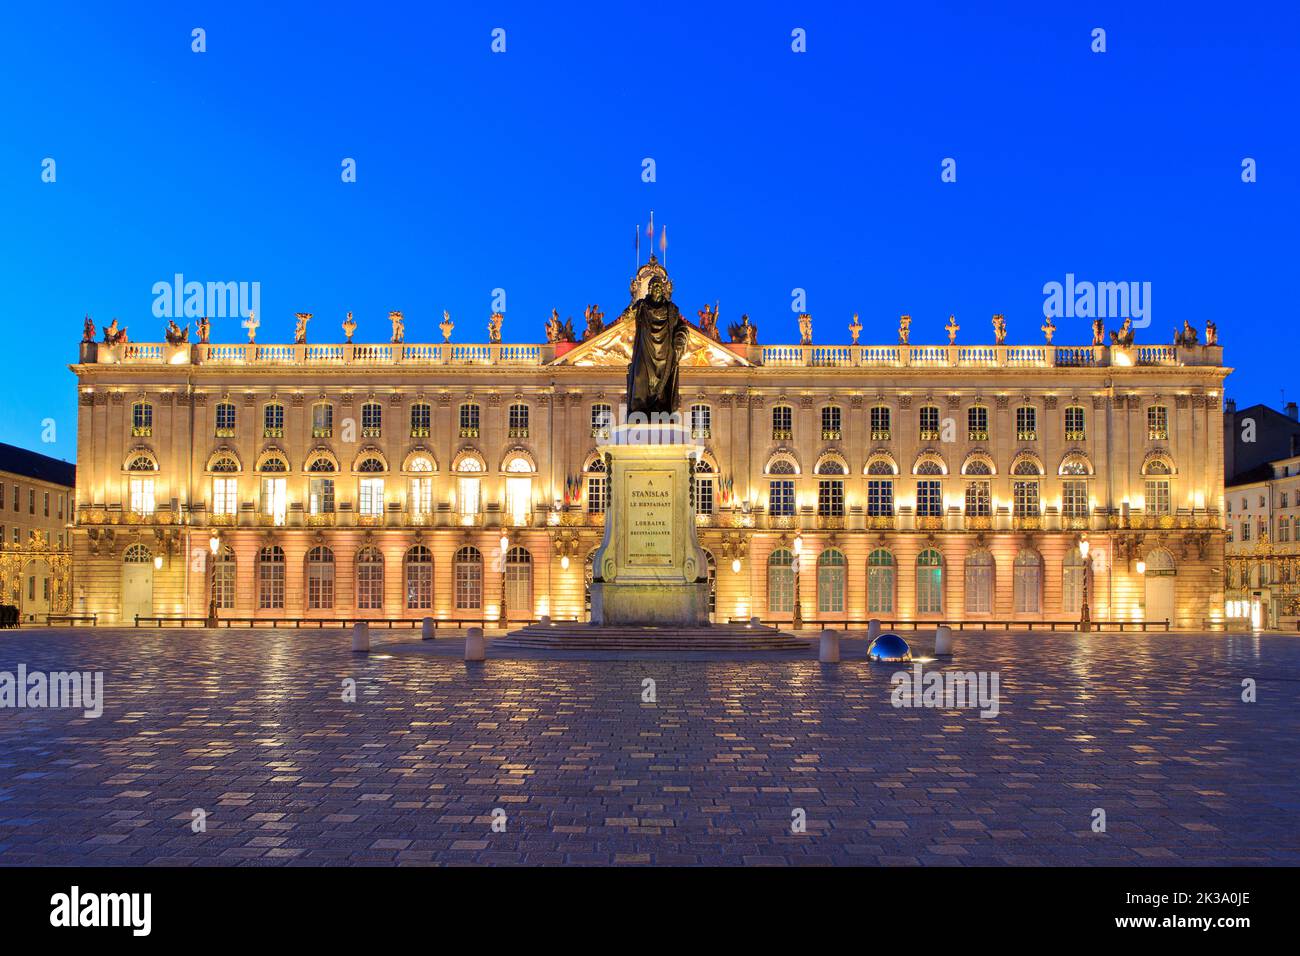 Statue of Stanislaus I, King of Poland and Grand Duke of Lithuania in front of the city hall at Place Stanislas in Nancy (Meurthe-et-Moselle), France Stock Photo